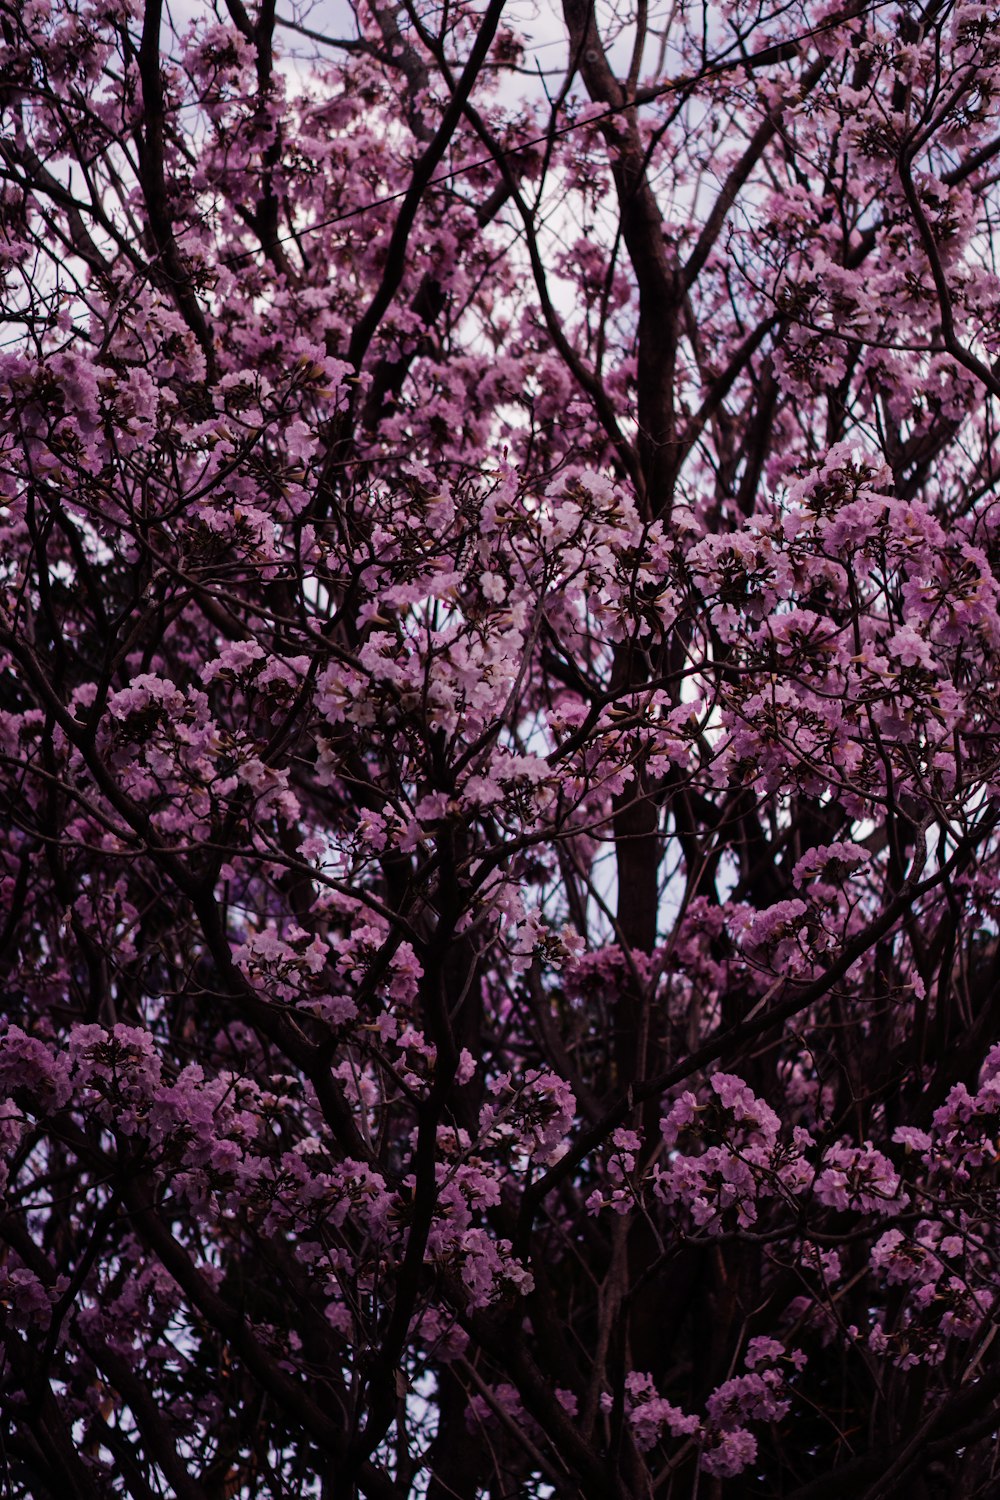 a tree with purple flowers in the foreground